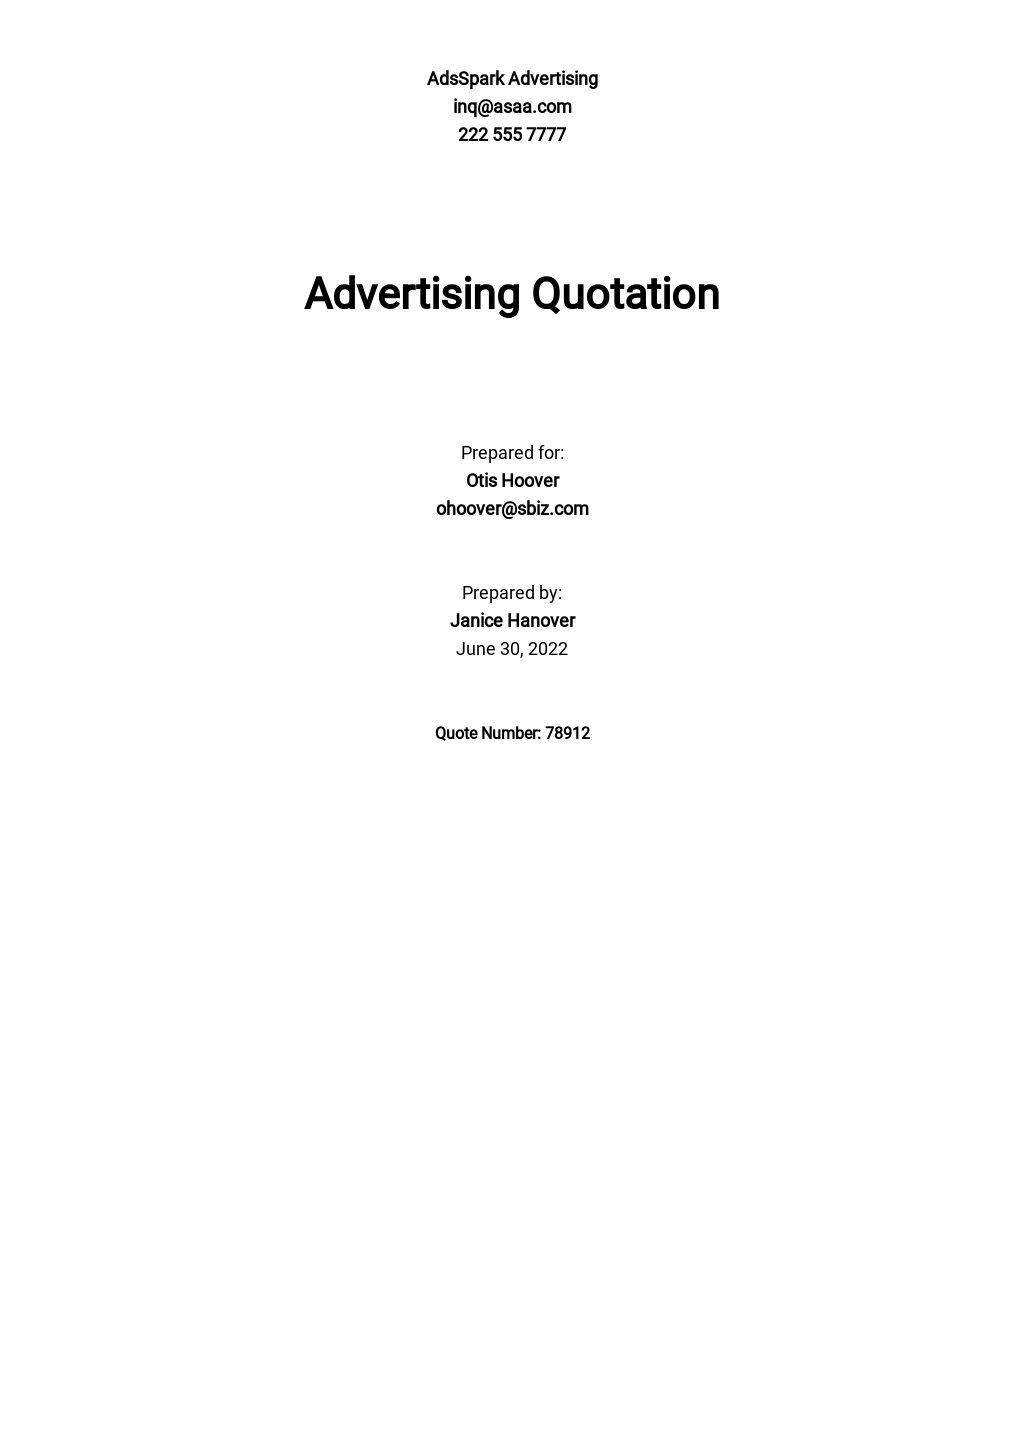 Simple Advertising Quotation Template - Google Docs, Google Sheets, Excel, Word